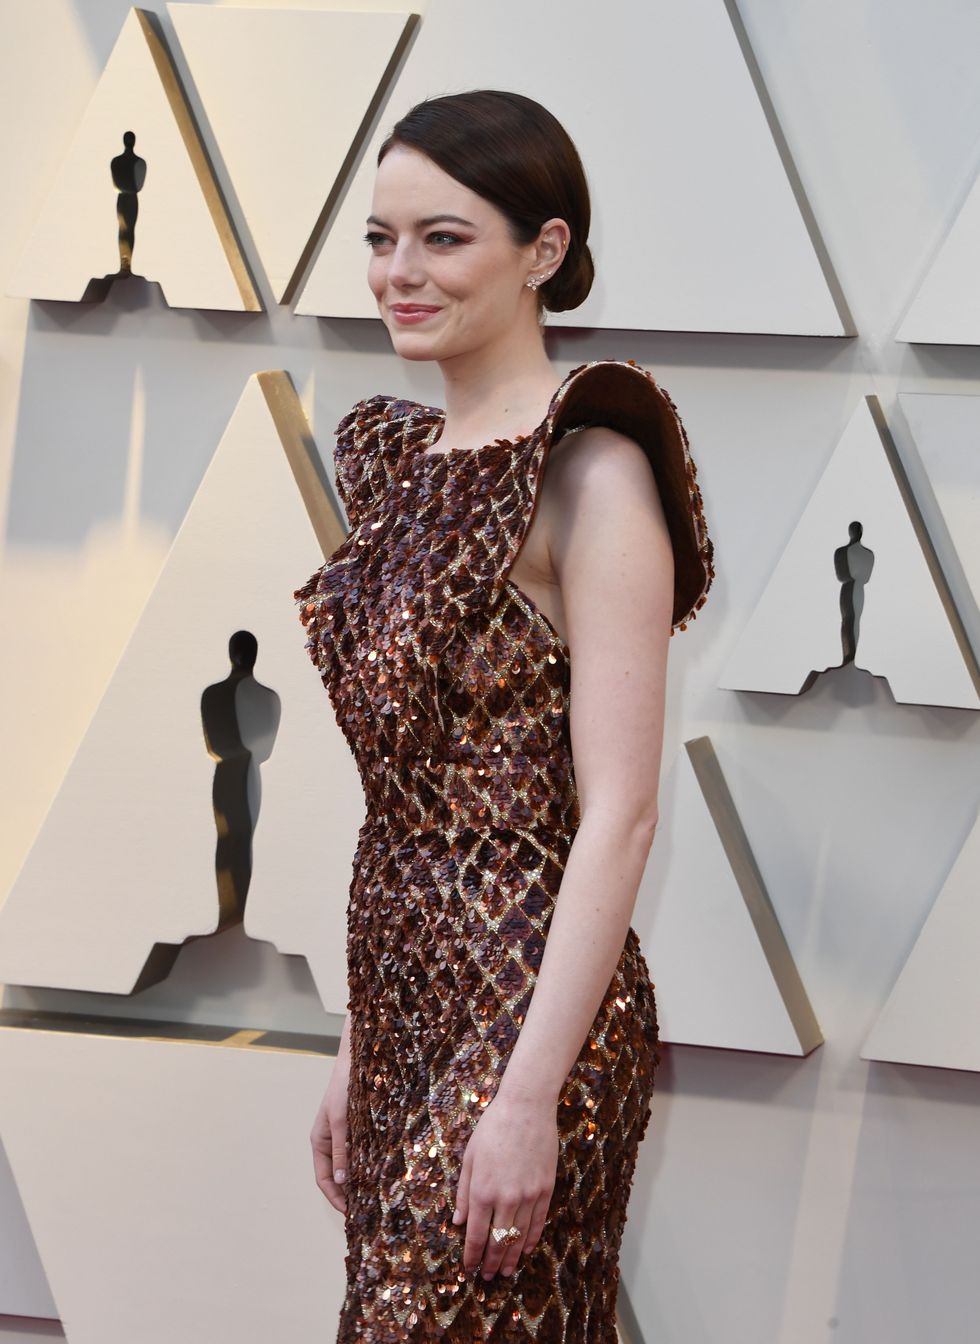 Emma Stone's 2019 Oscar Dress Looks Like a Honey Comb - 'The Favourite'  Actress' Red Carpet Outfit